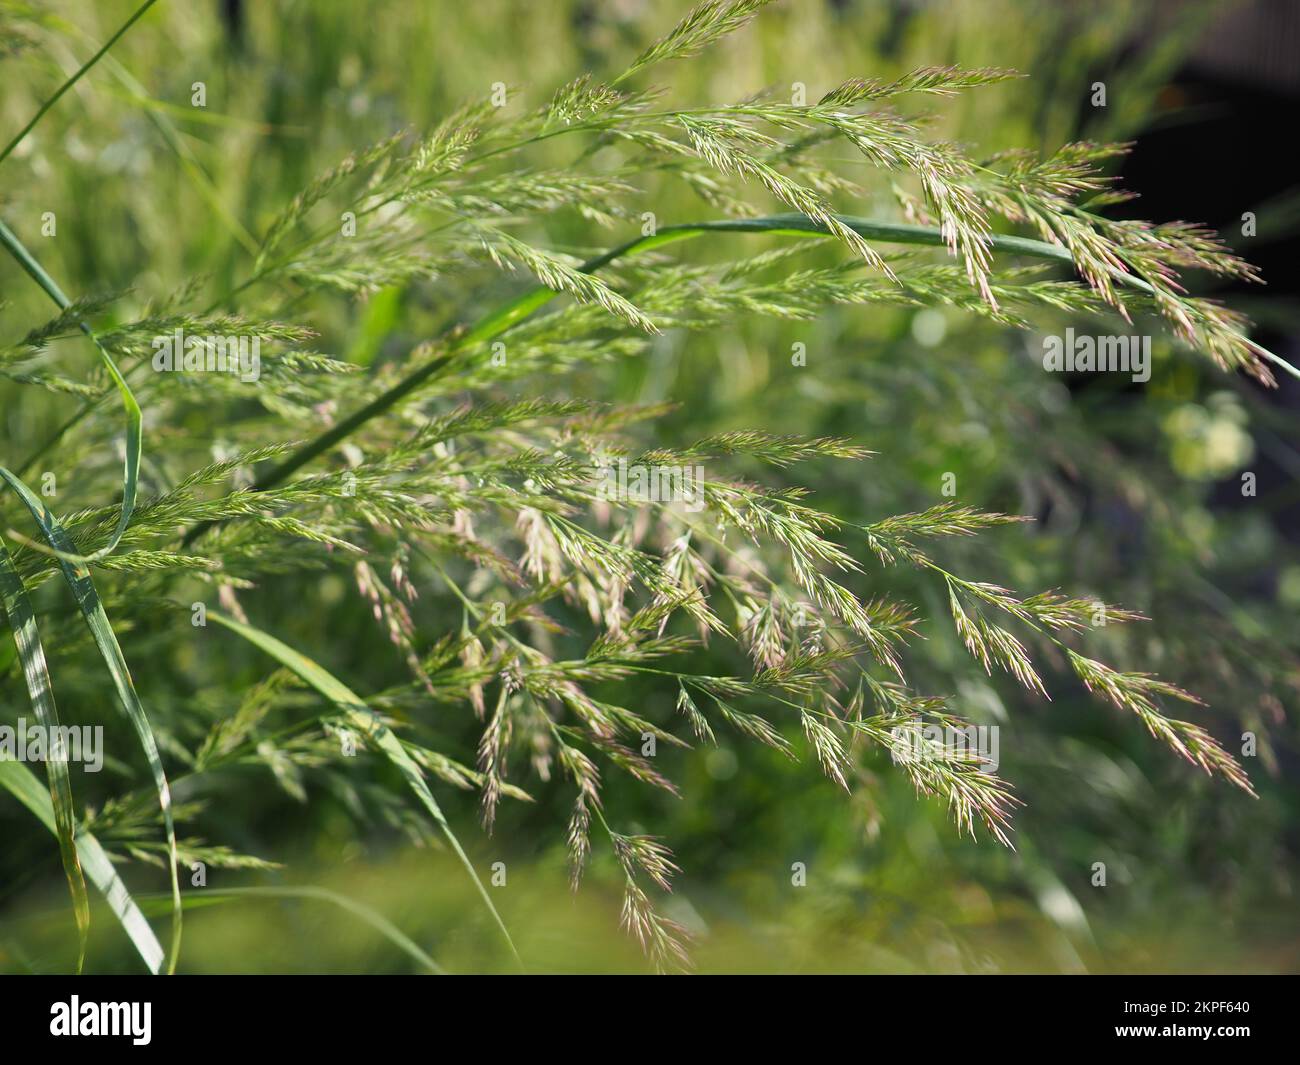 Close up of newly opened flower heads of Calamagrostis x acutiflora 'Karl Foerster' grass in the sun (feather reed grass) Stock Photo